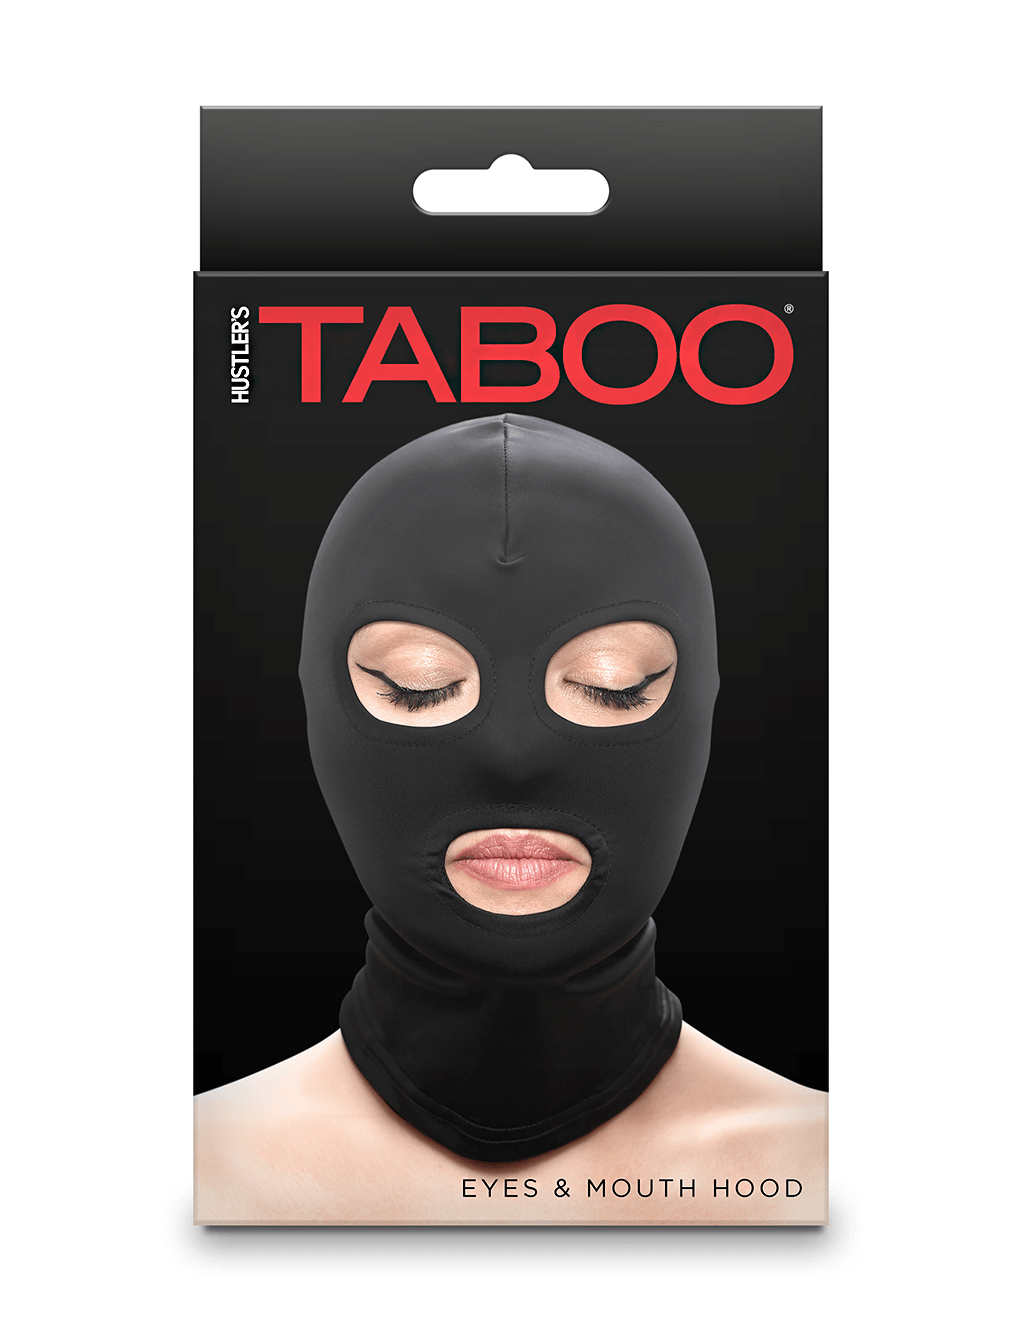 Taboo Eyes & Mouth Hood - Black - Box - Front